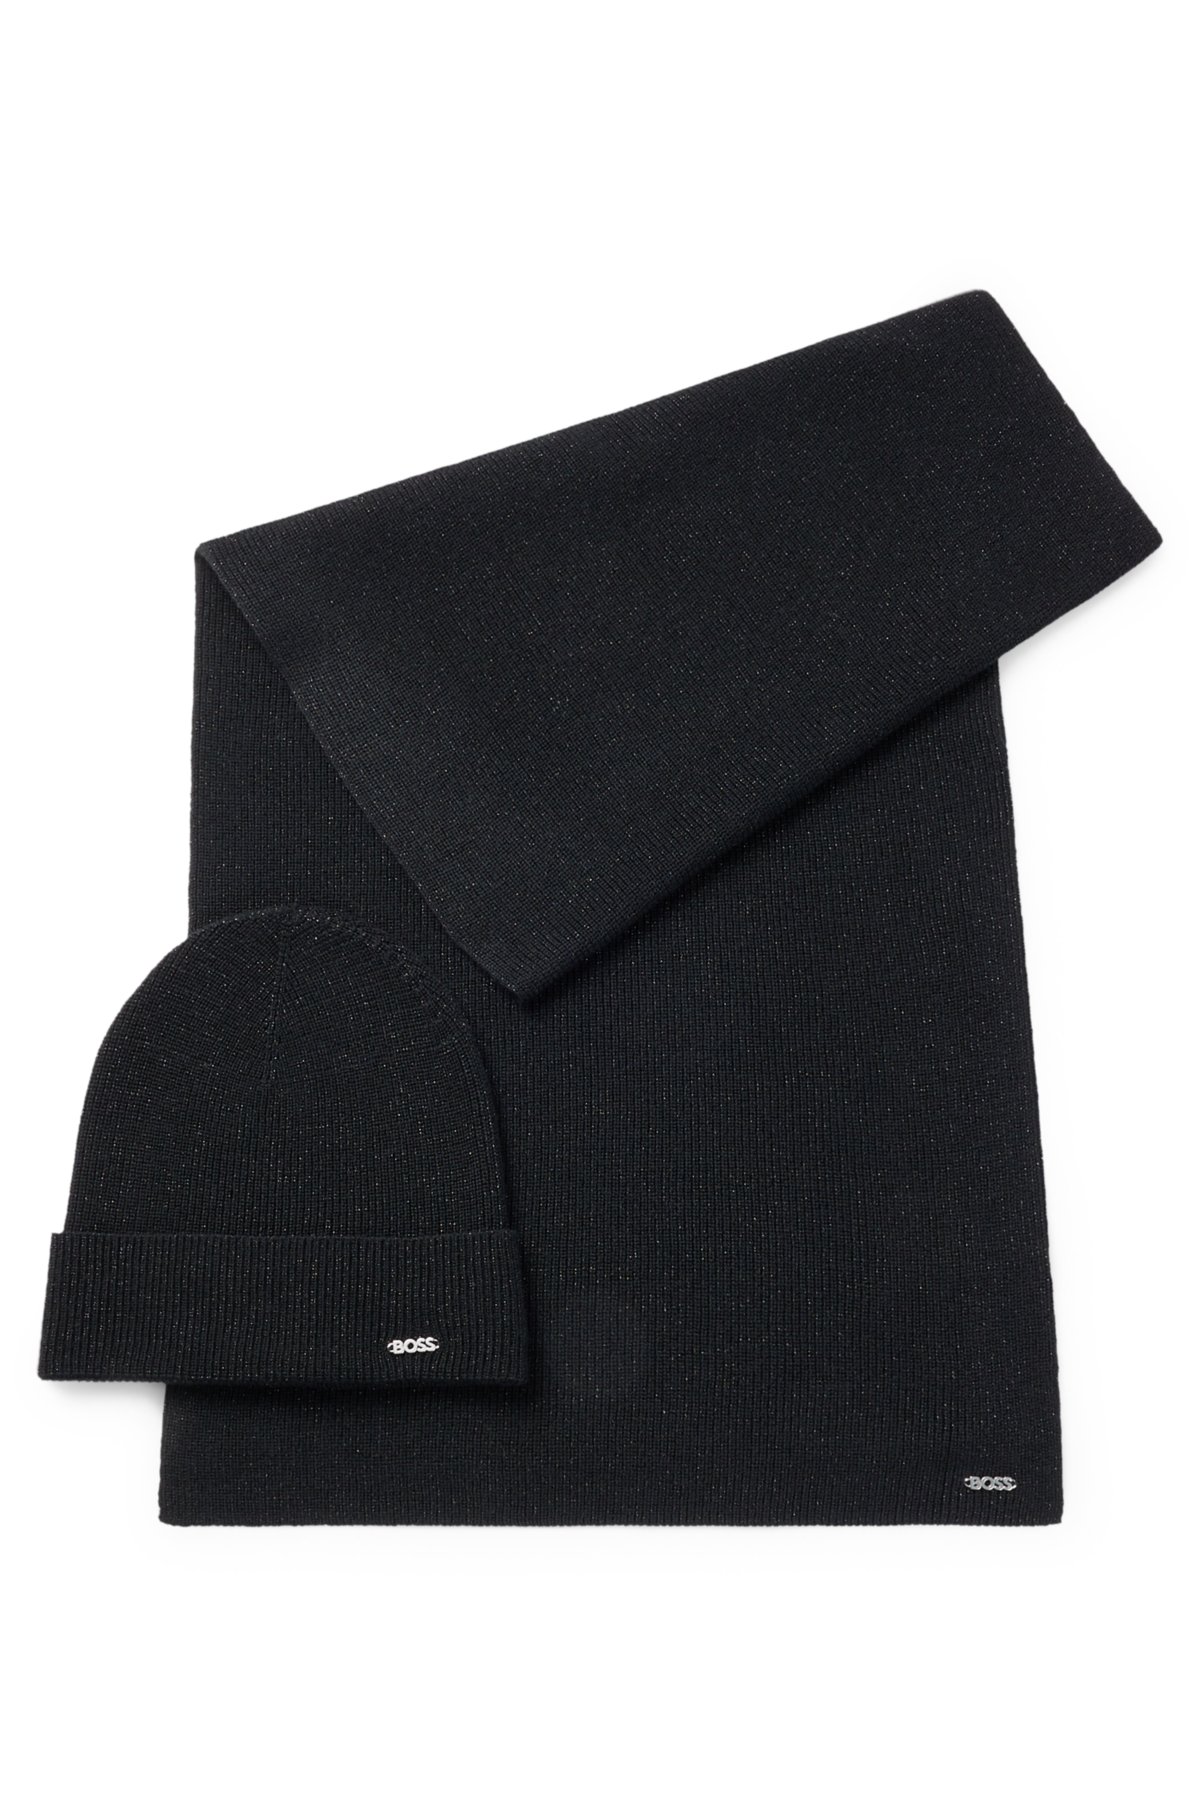 Boss Glittery-effect Beanie Hat and Scarf Gift Set- Black | Women's Scarves Size pcs.